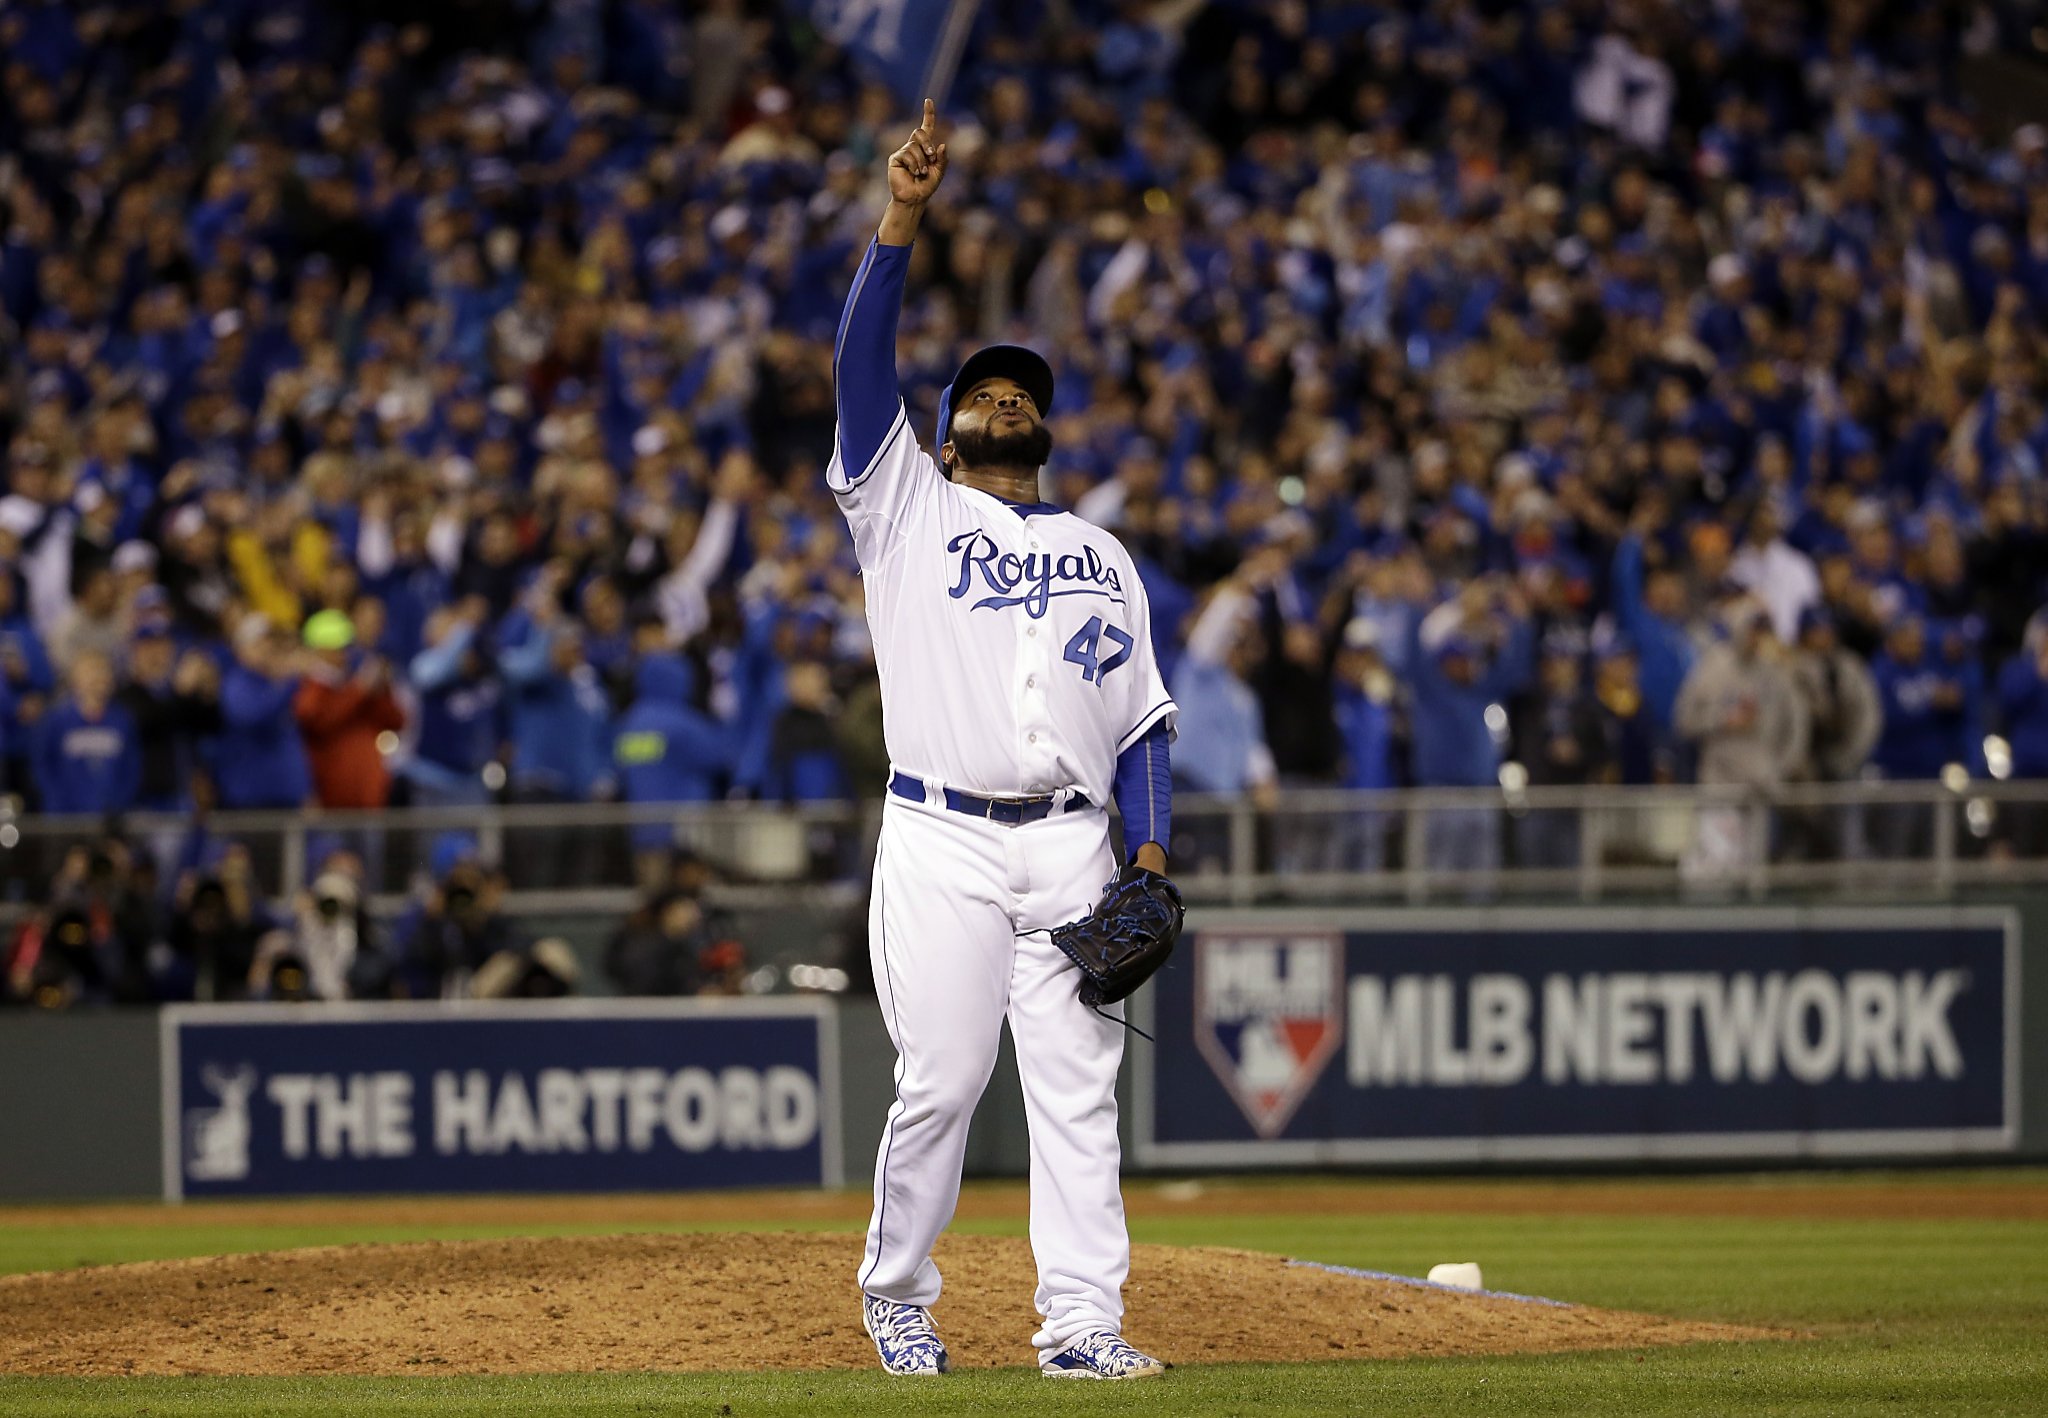 Giants agree to 6-year, $130 million contract with pitcher Johnny Cueto